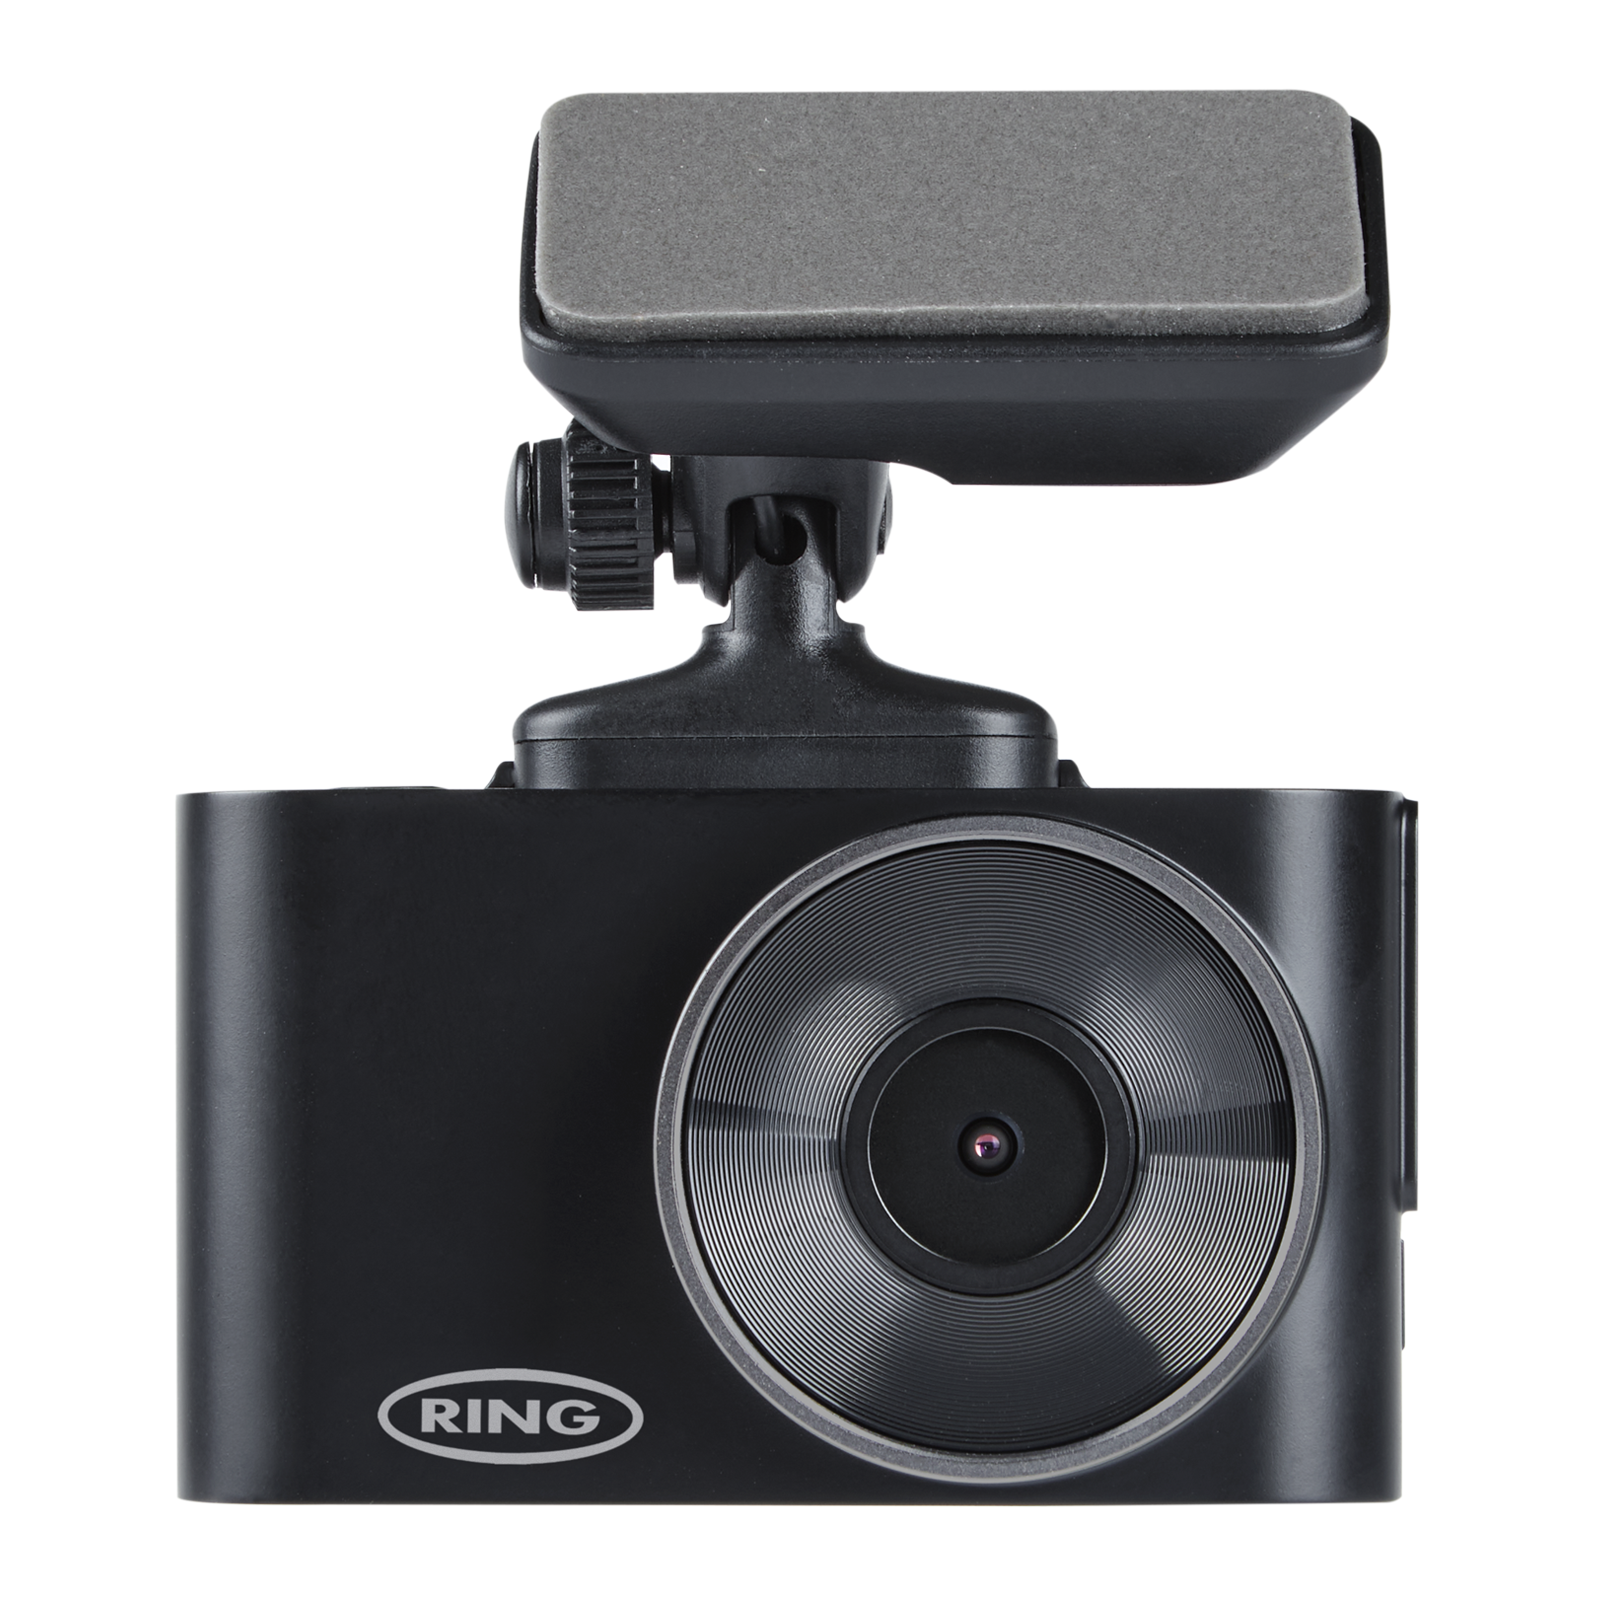 Dash Camera is Best Buy for 2022